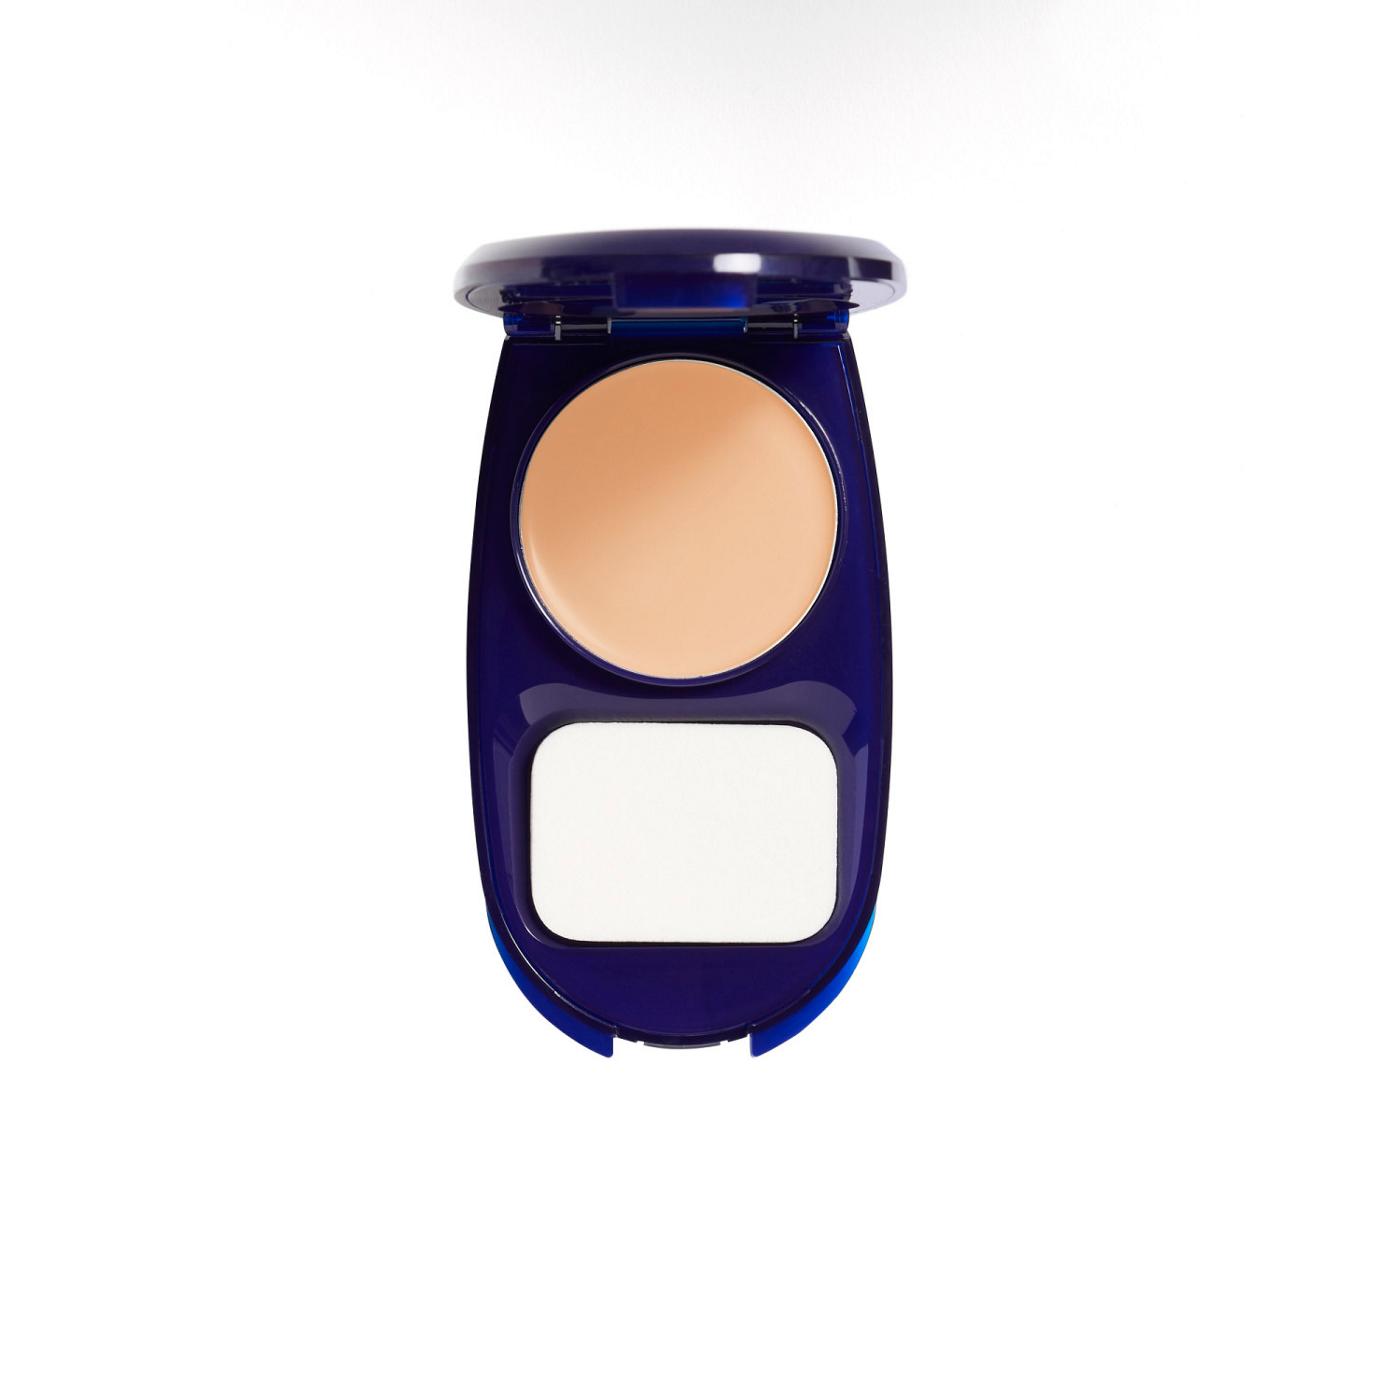 Covergirl Aqua Smooth Foundation Compact 720 Creamy Natural; image 3 of 3